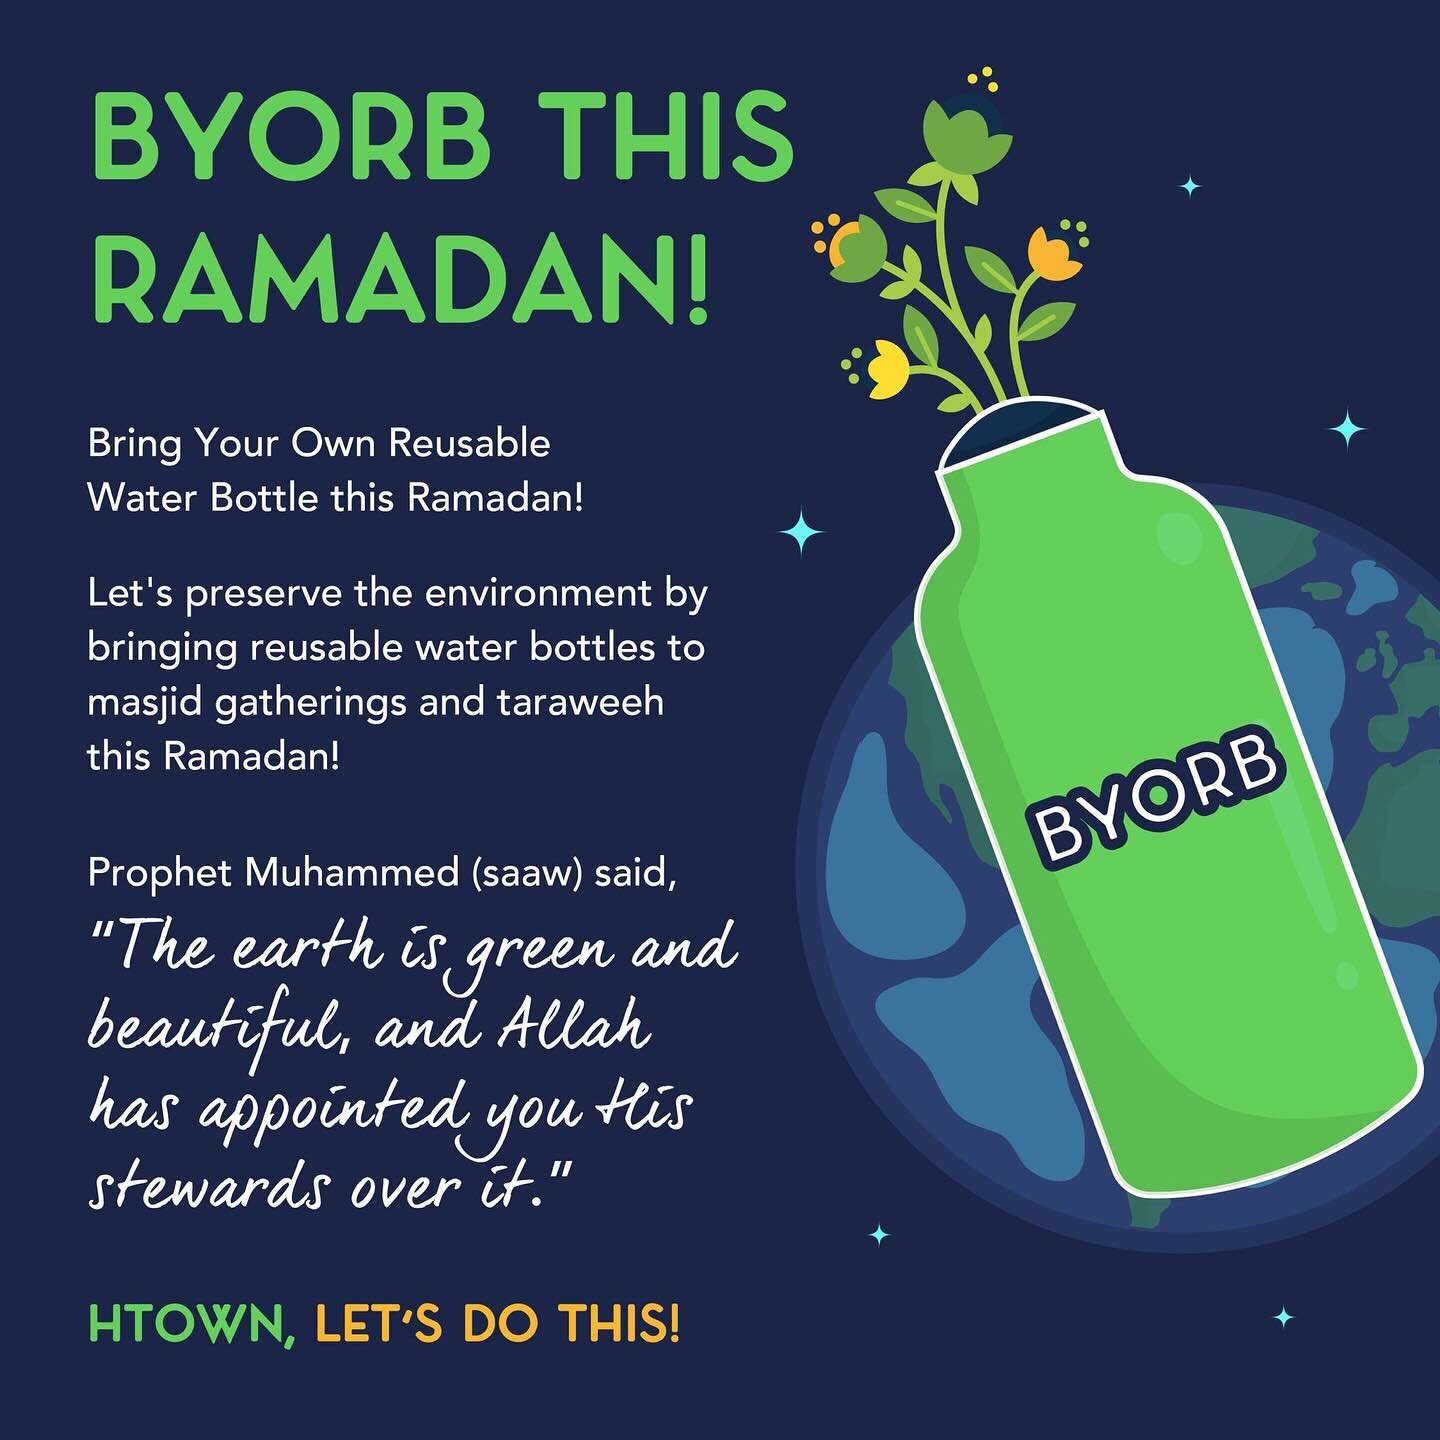 An-Nisa is proud to BYORB this Ramadan in this community-wide initiative ♻️💚

Bring Your Own Reusable Water Bottle this Ramadan!

Did you know that it takes at least 450 years for a plastic water bottle to biodegrade?

Let&rsquo;s preserve the envir